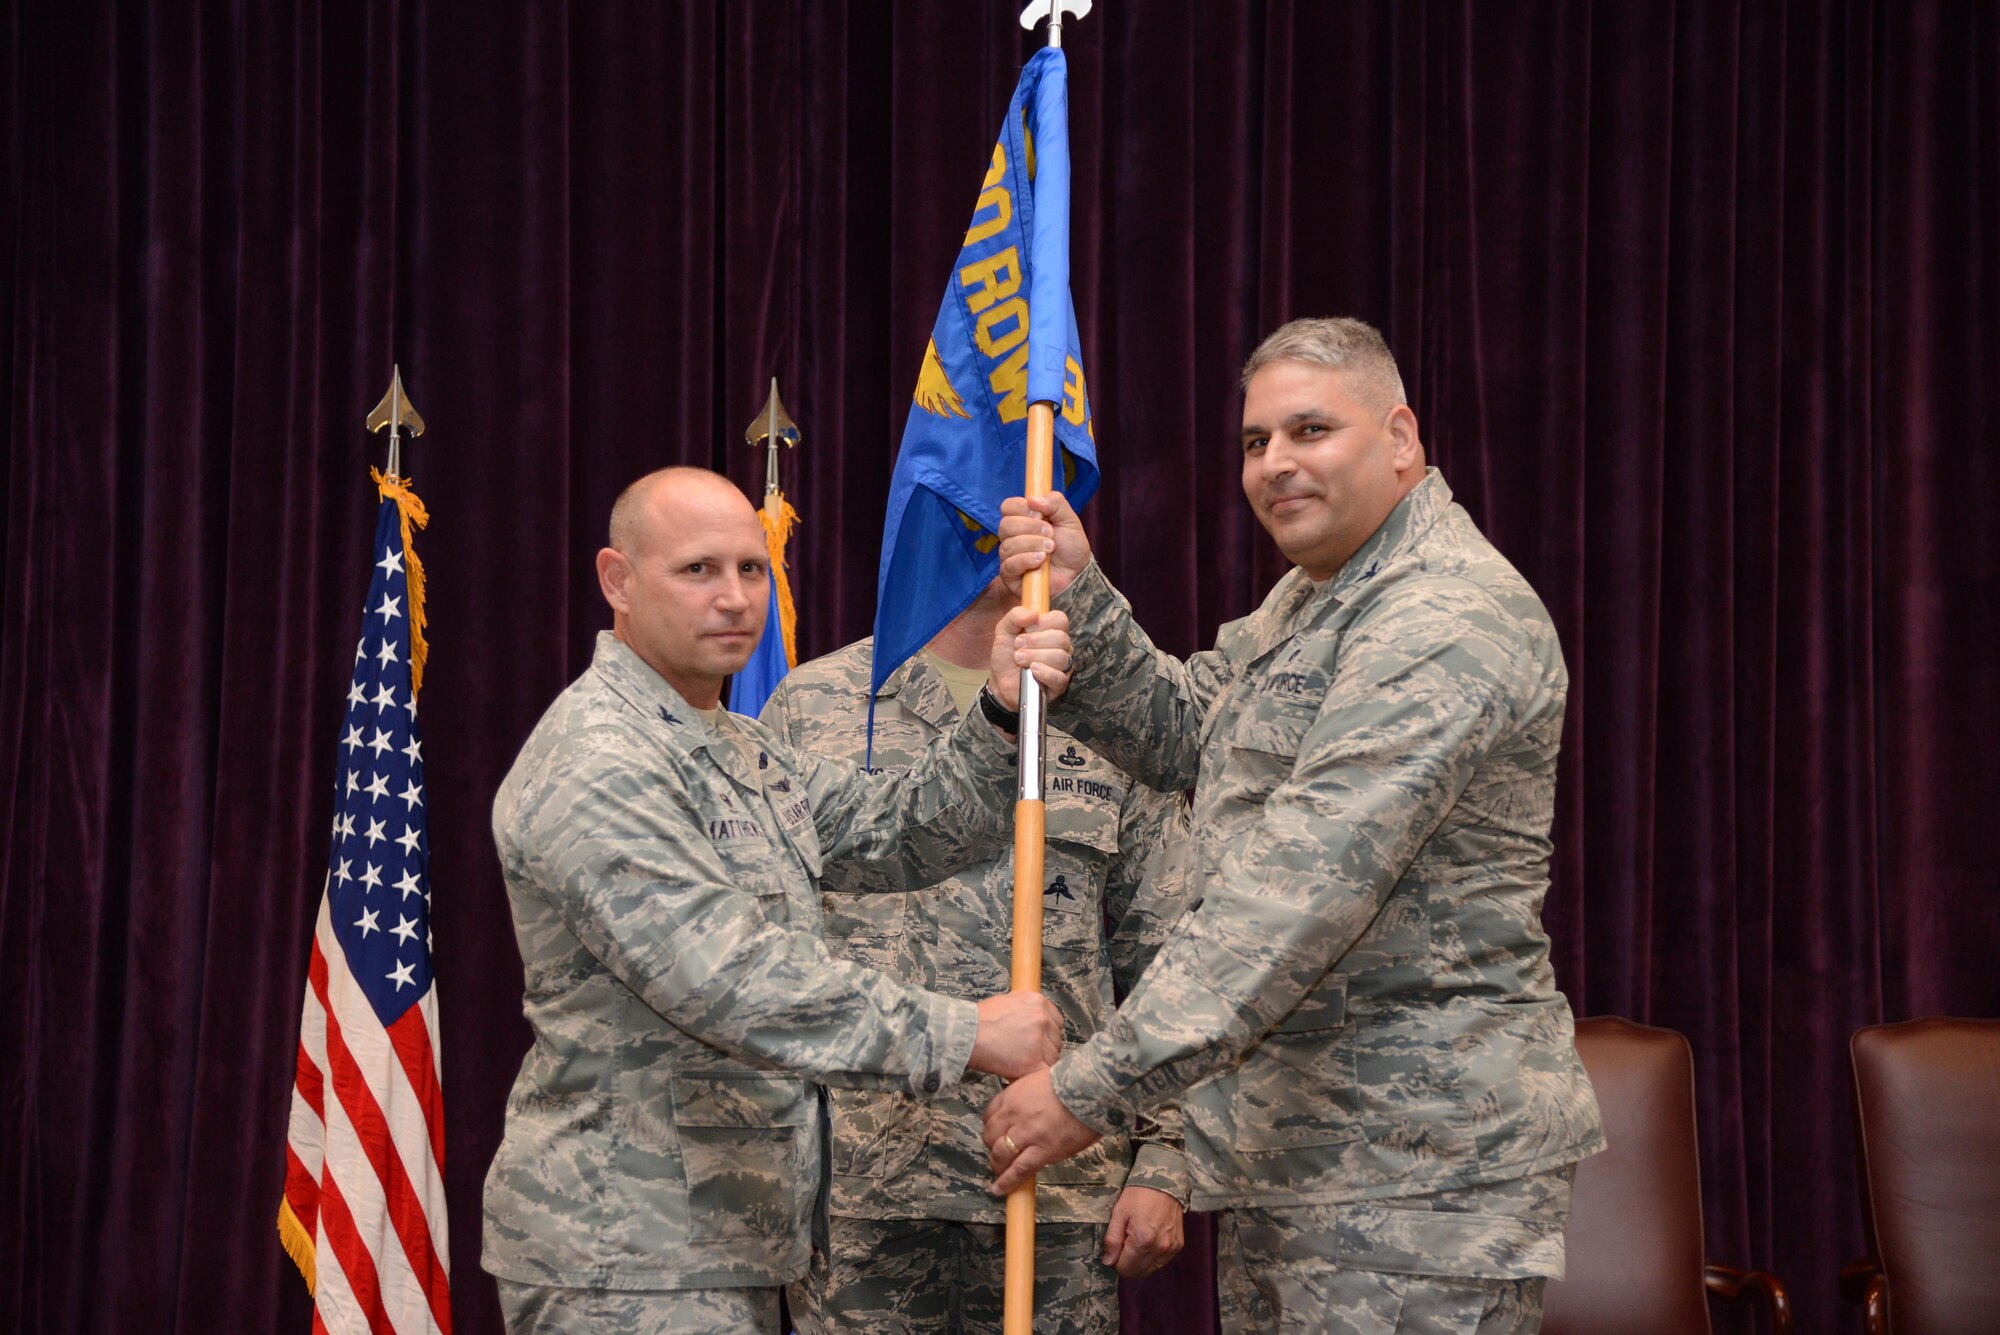 Col. Kurt Matthews (right), 920th Rescue Wing commander, hands the 920th Operations Group guidon to Col. Michael Loforti, during an assumption of command ceremony, June 3, 2017 at Patrick Air Force Base, Florida. (U.S. Air Force photo/Staff Sgt. Jared Trimarchi) 